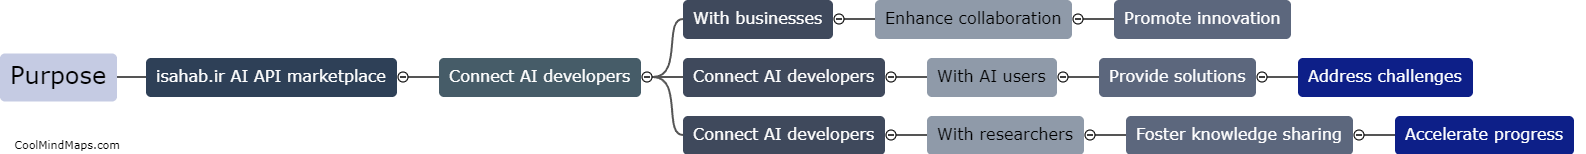 What is the purpose of isahab.ir AI API marketplace?